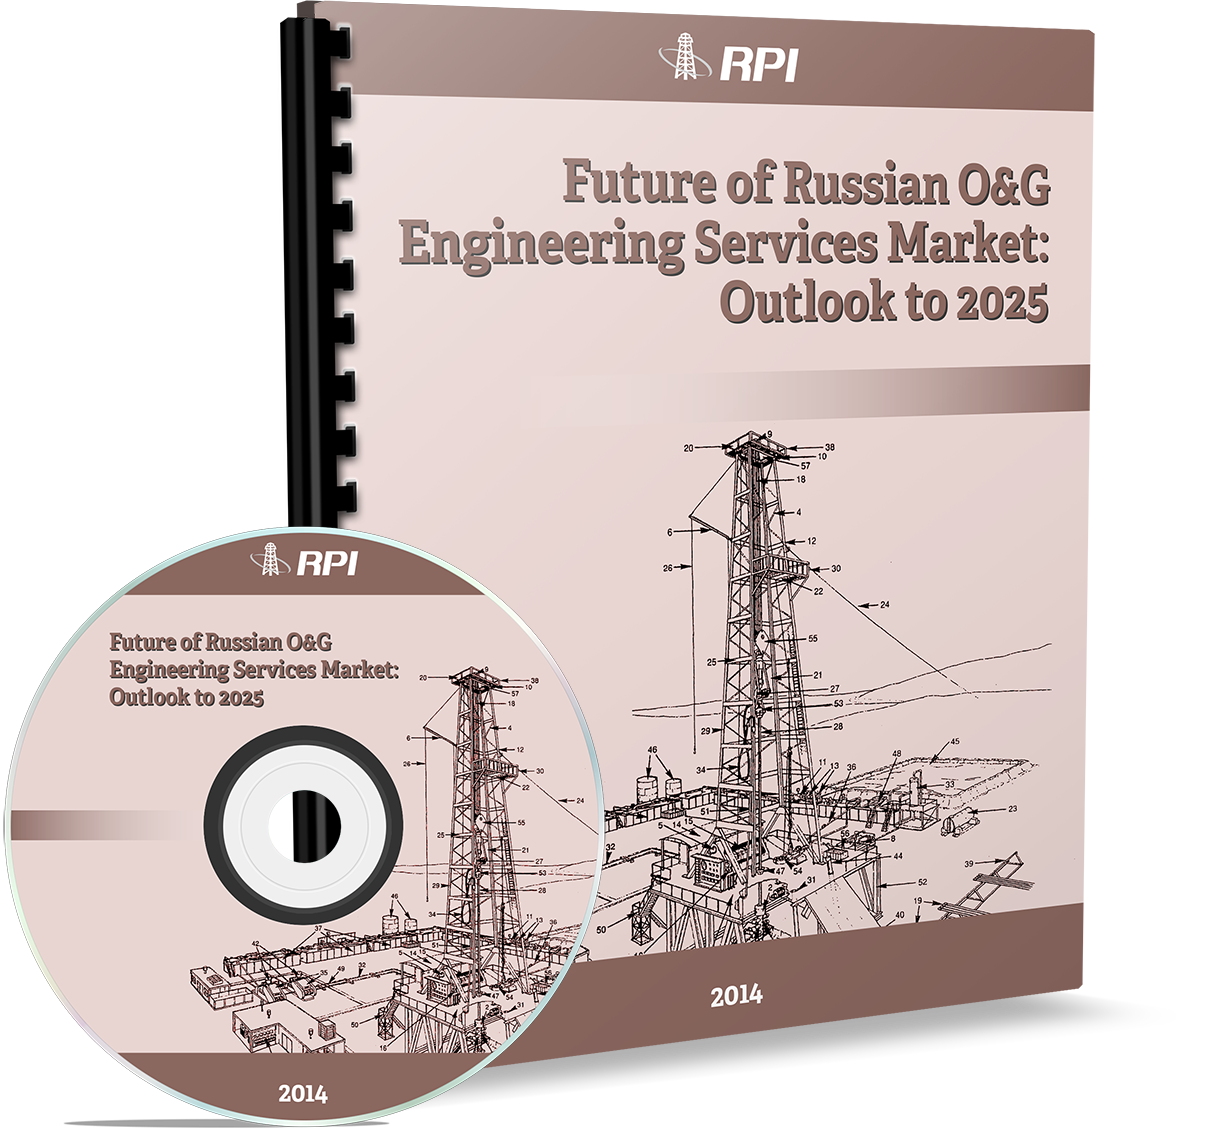 Future of Russian O&G Engineering Services Market: Outlook to 2025